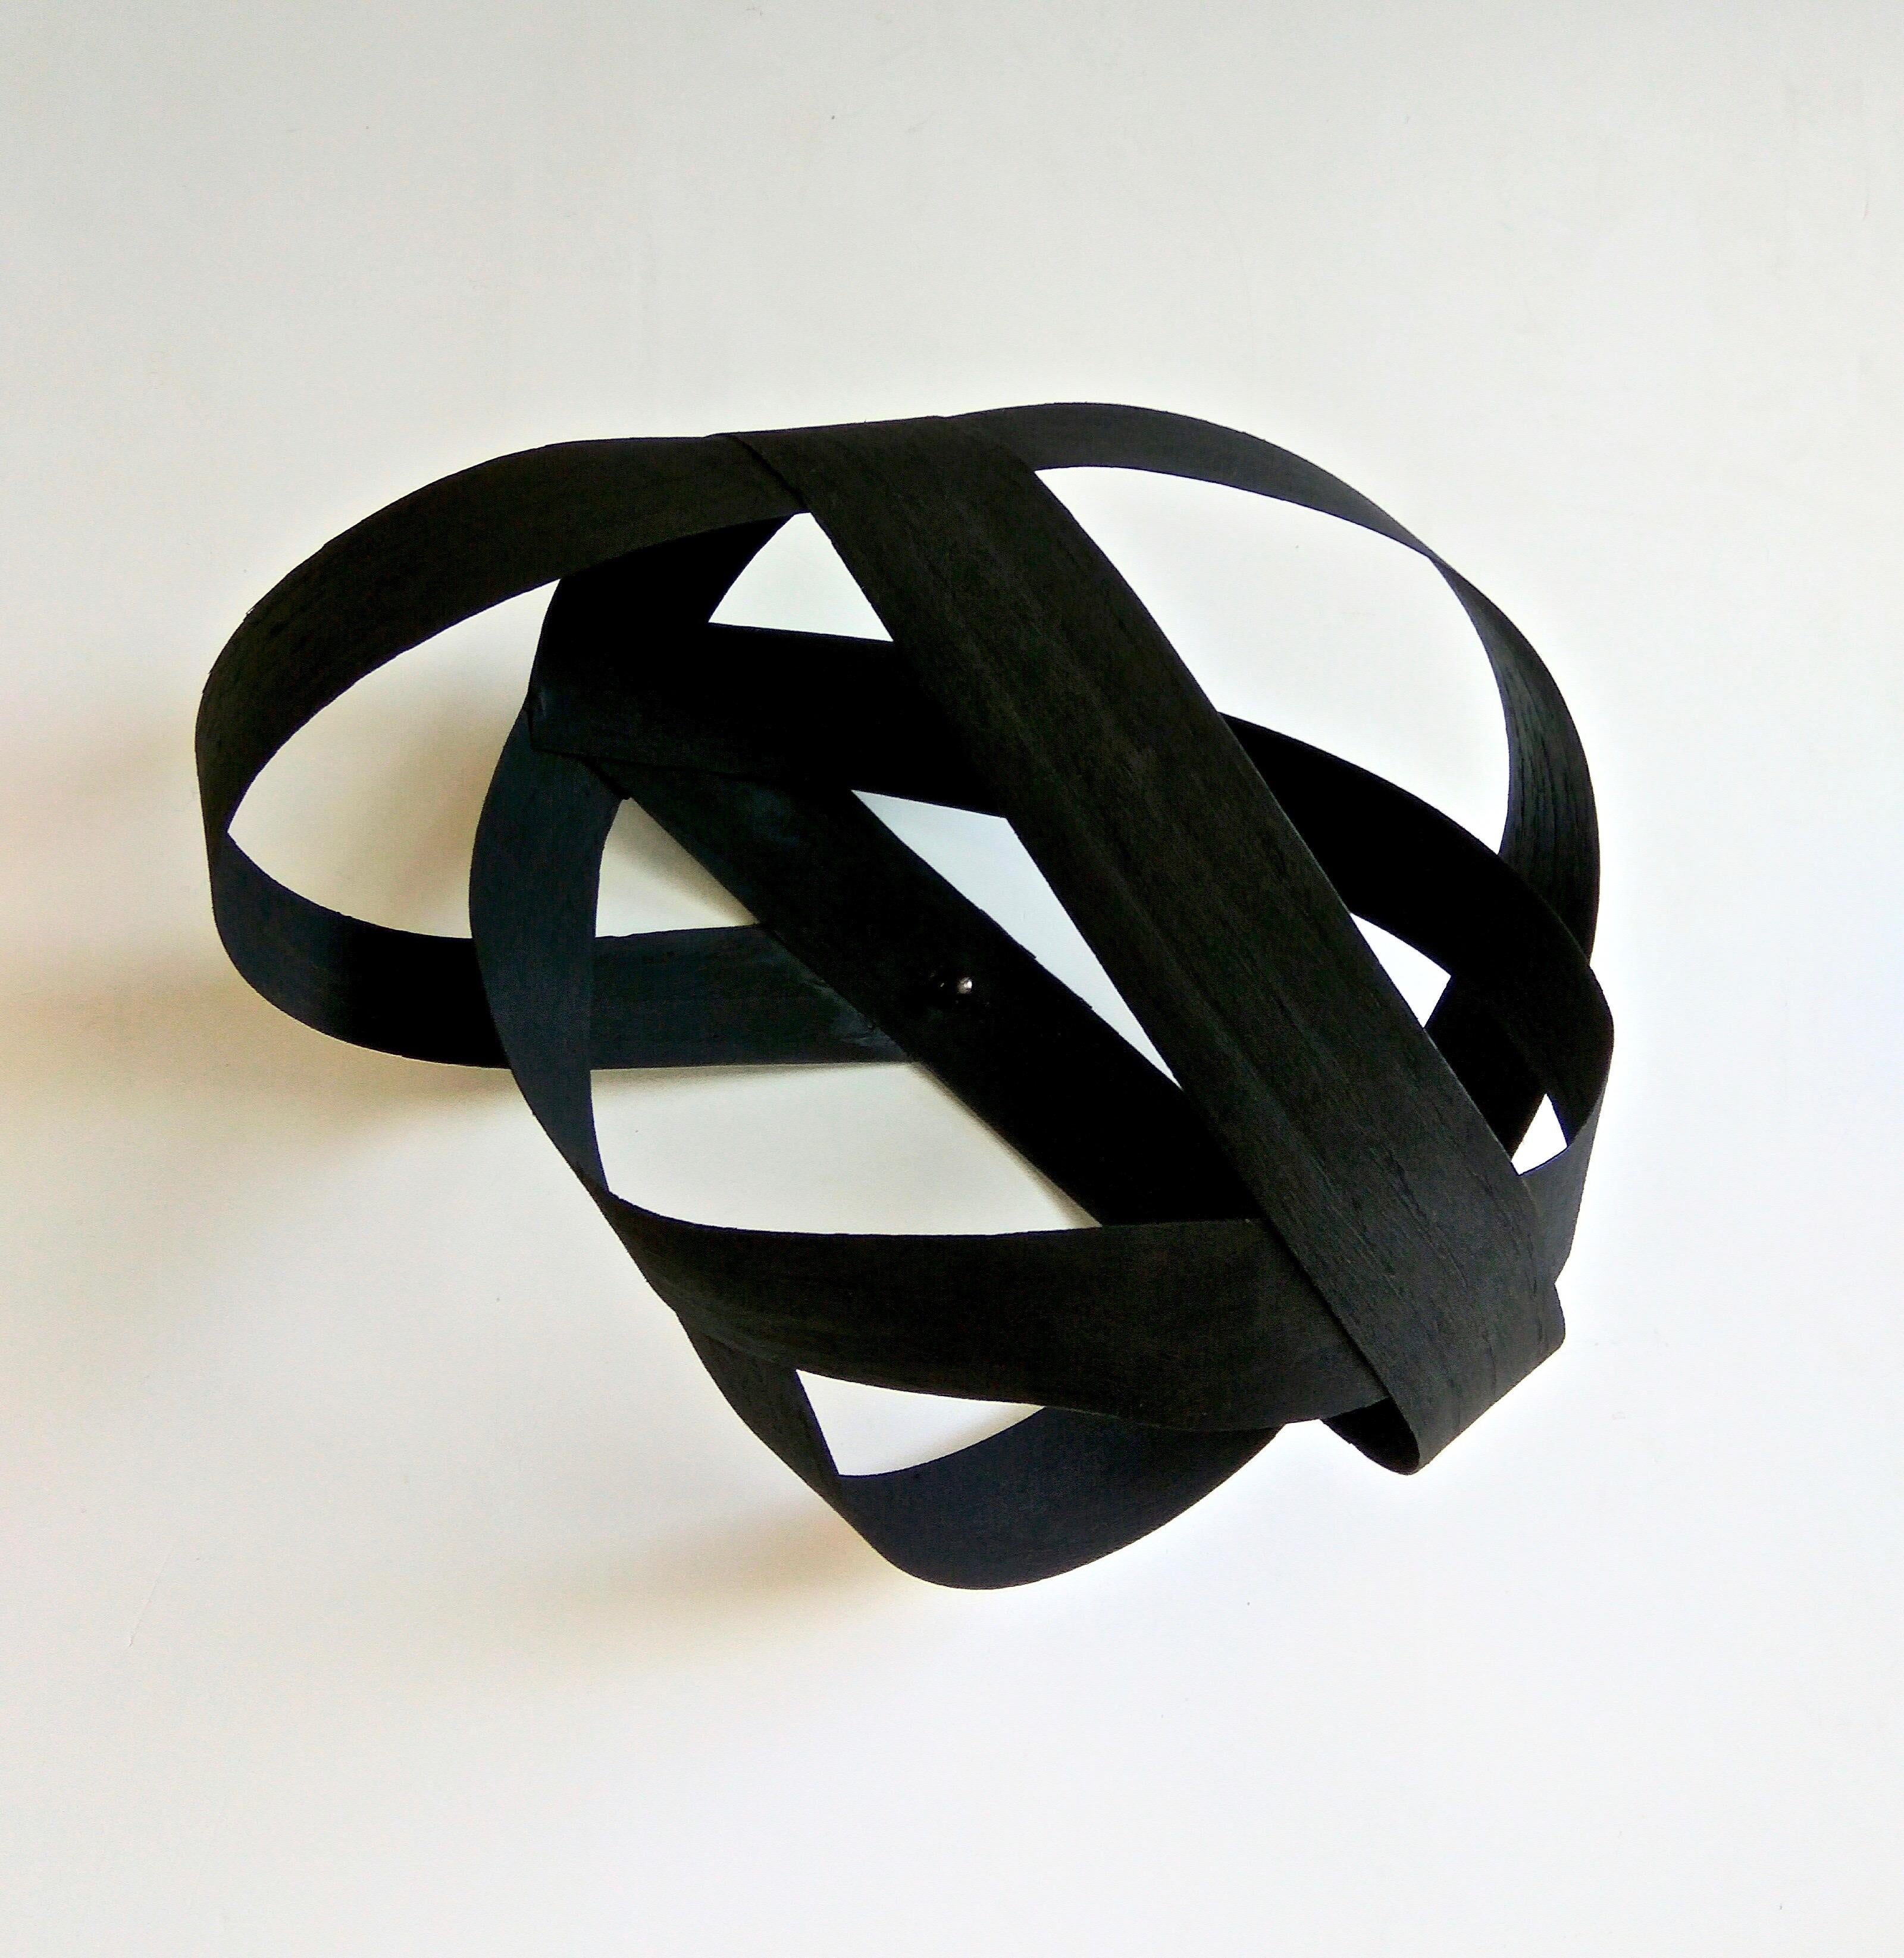 Handmade topos ribbon by Le Meduse
Unique piece
Dimensions: W 40, D 25, H 22 cm
Materials: painted wood.

Each model is unique because it is handmade, it can be reproduced in a similar but not identical way. Request customization. Each model is